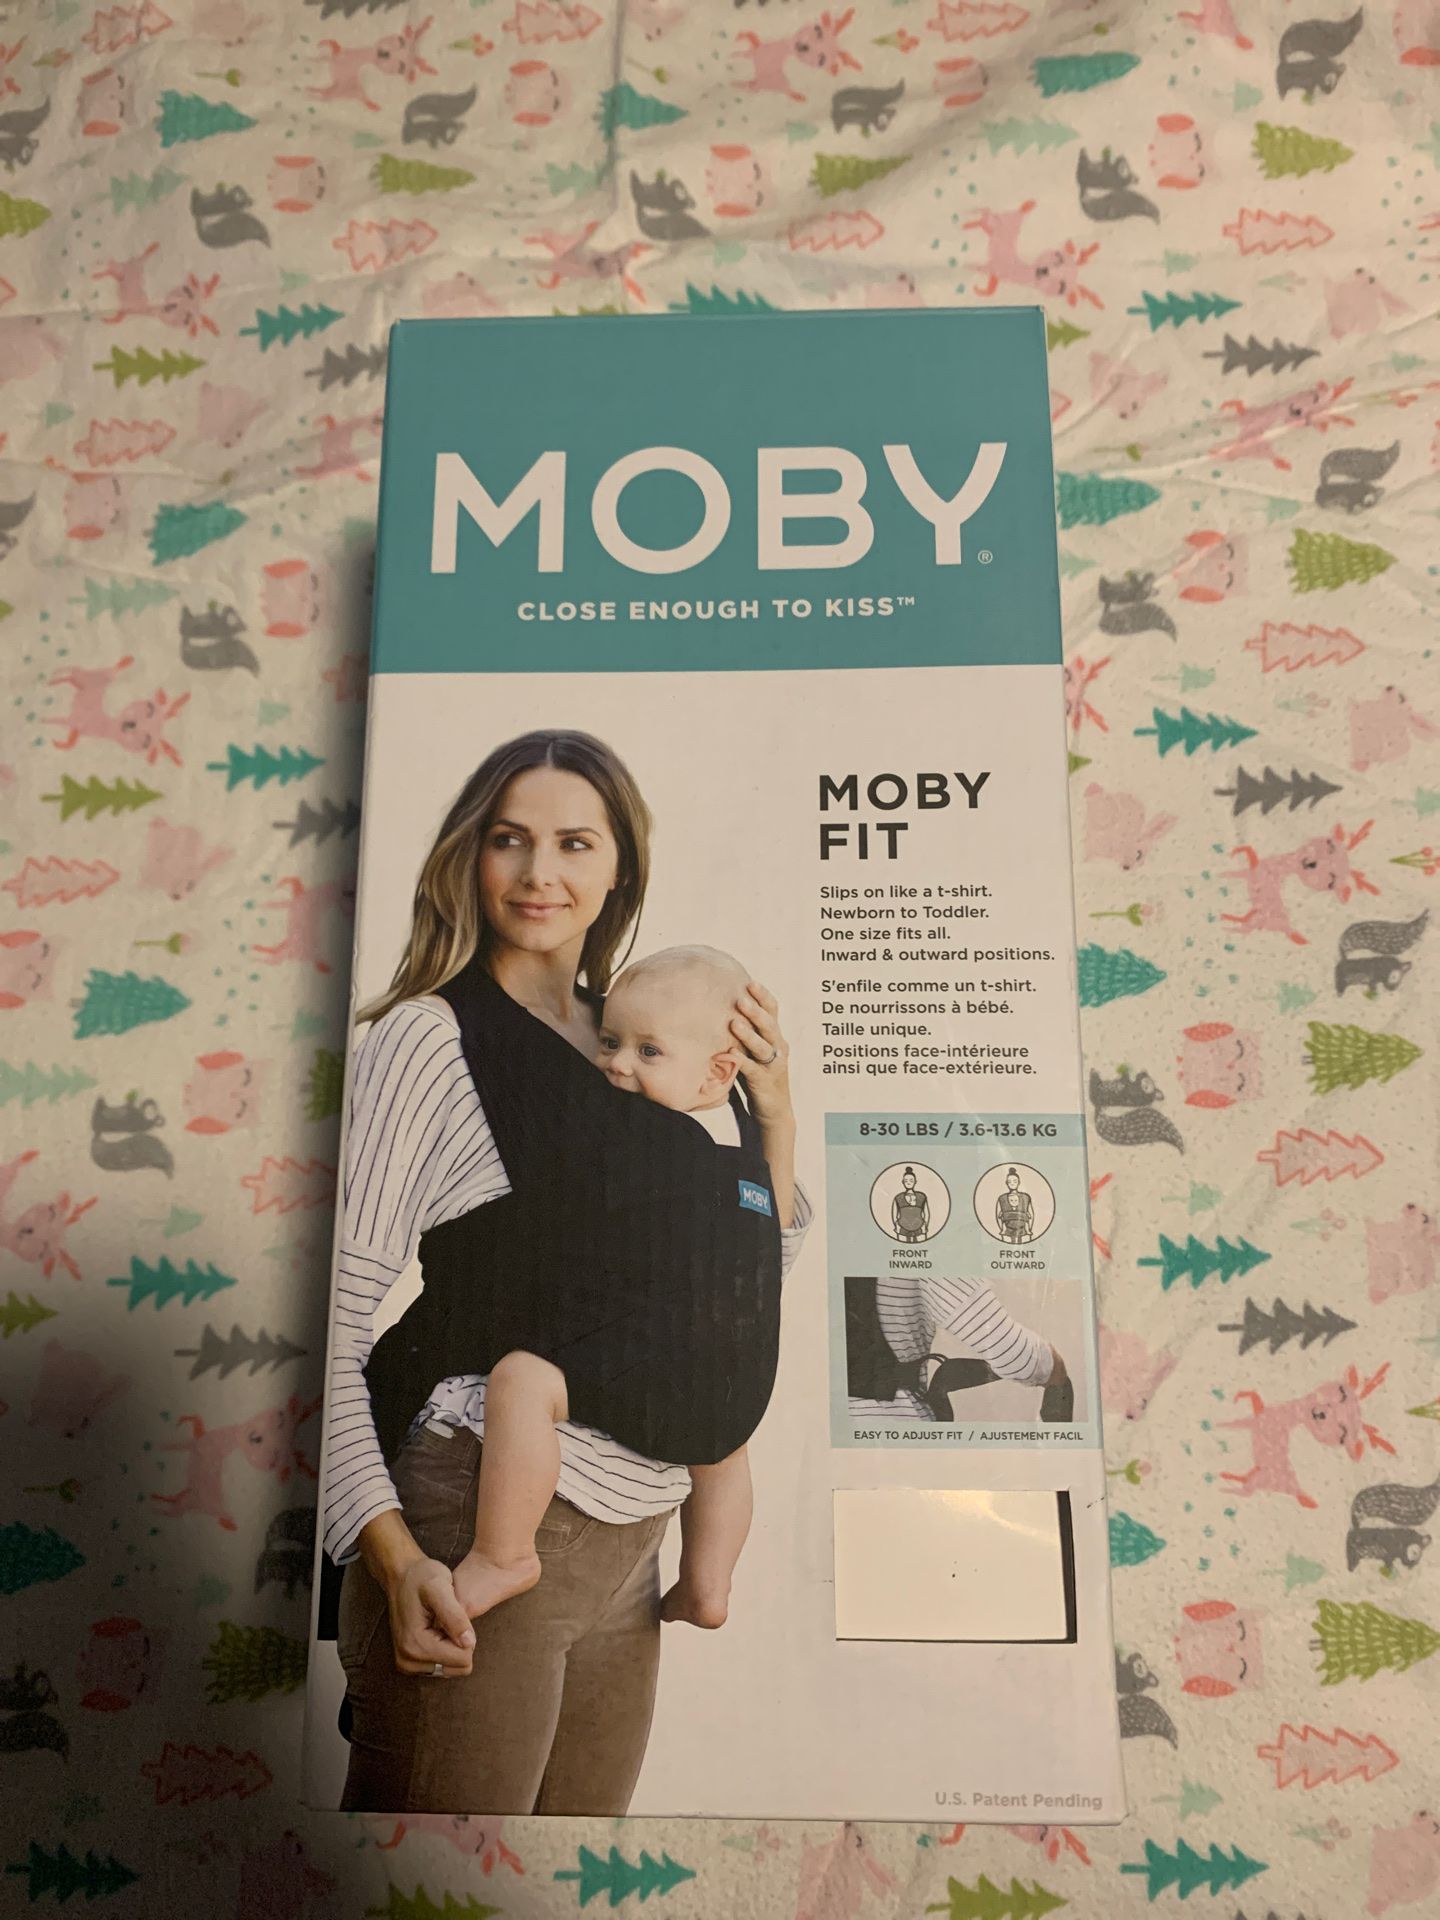 Moby fit